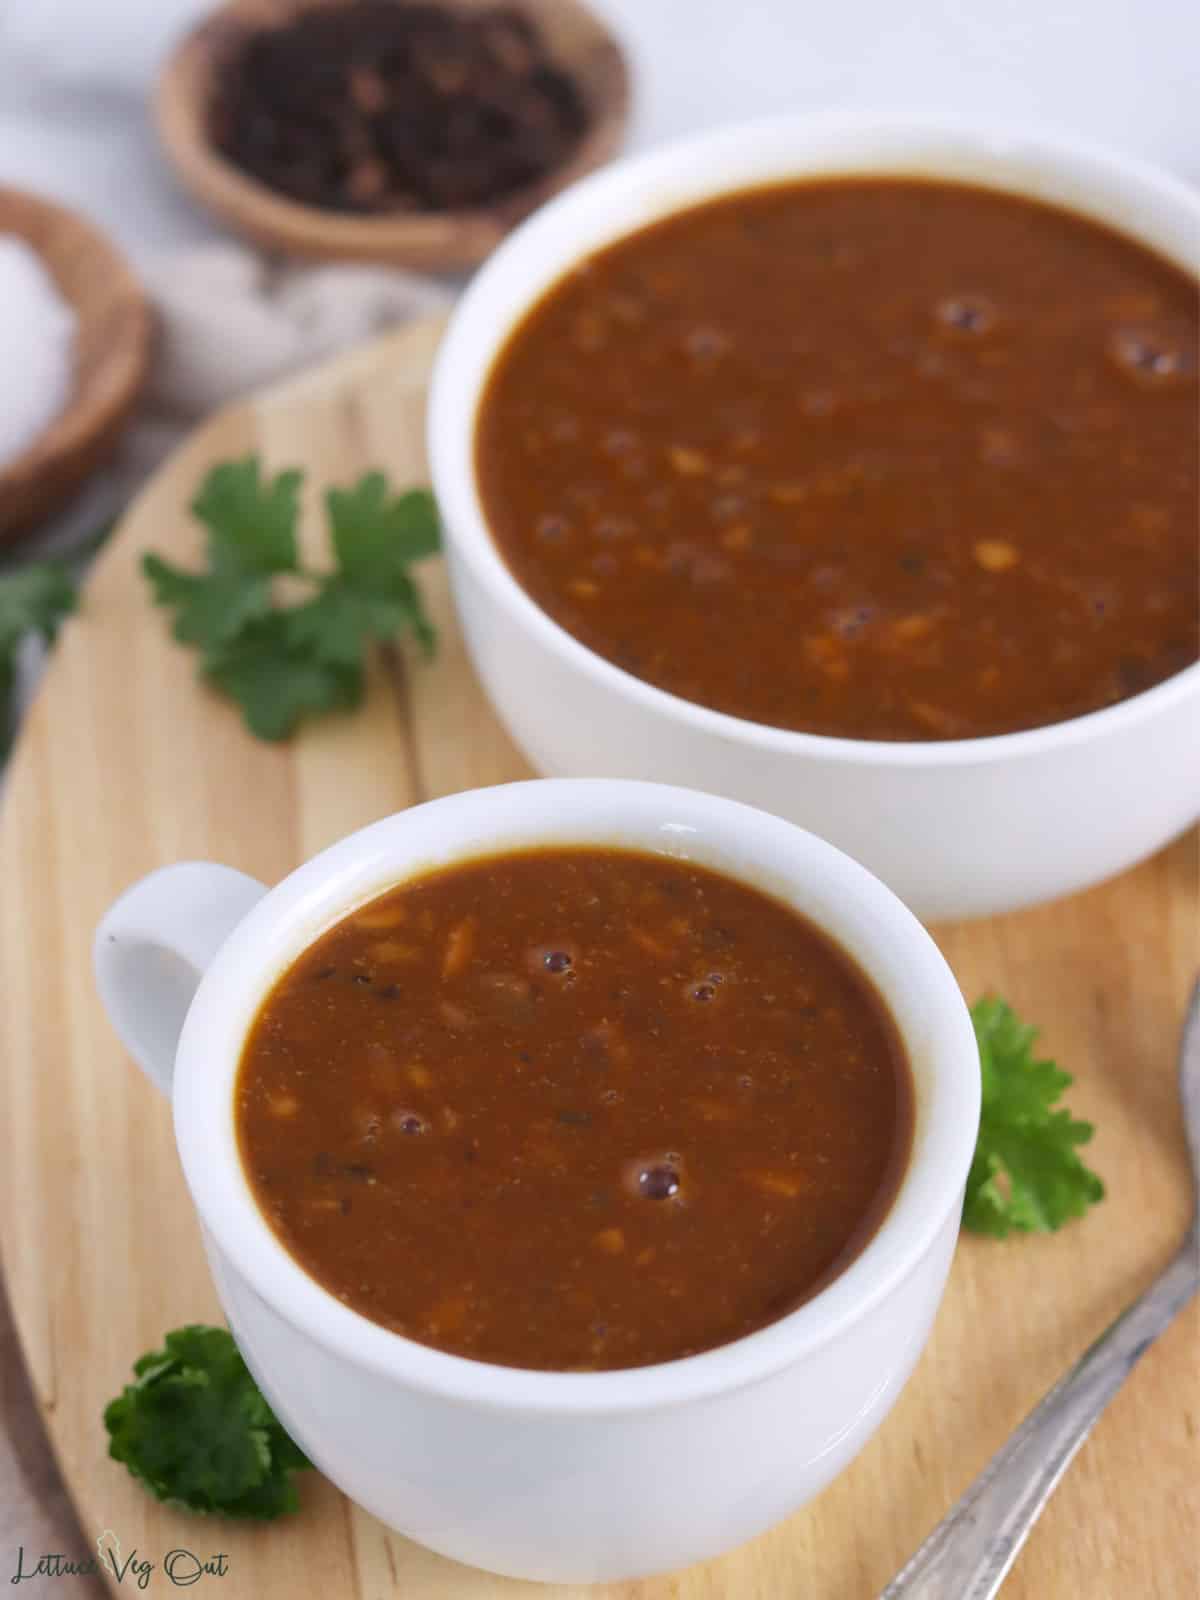 A small cup and bowl of brown gravy on a wood board.